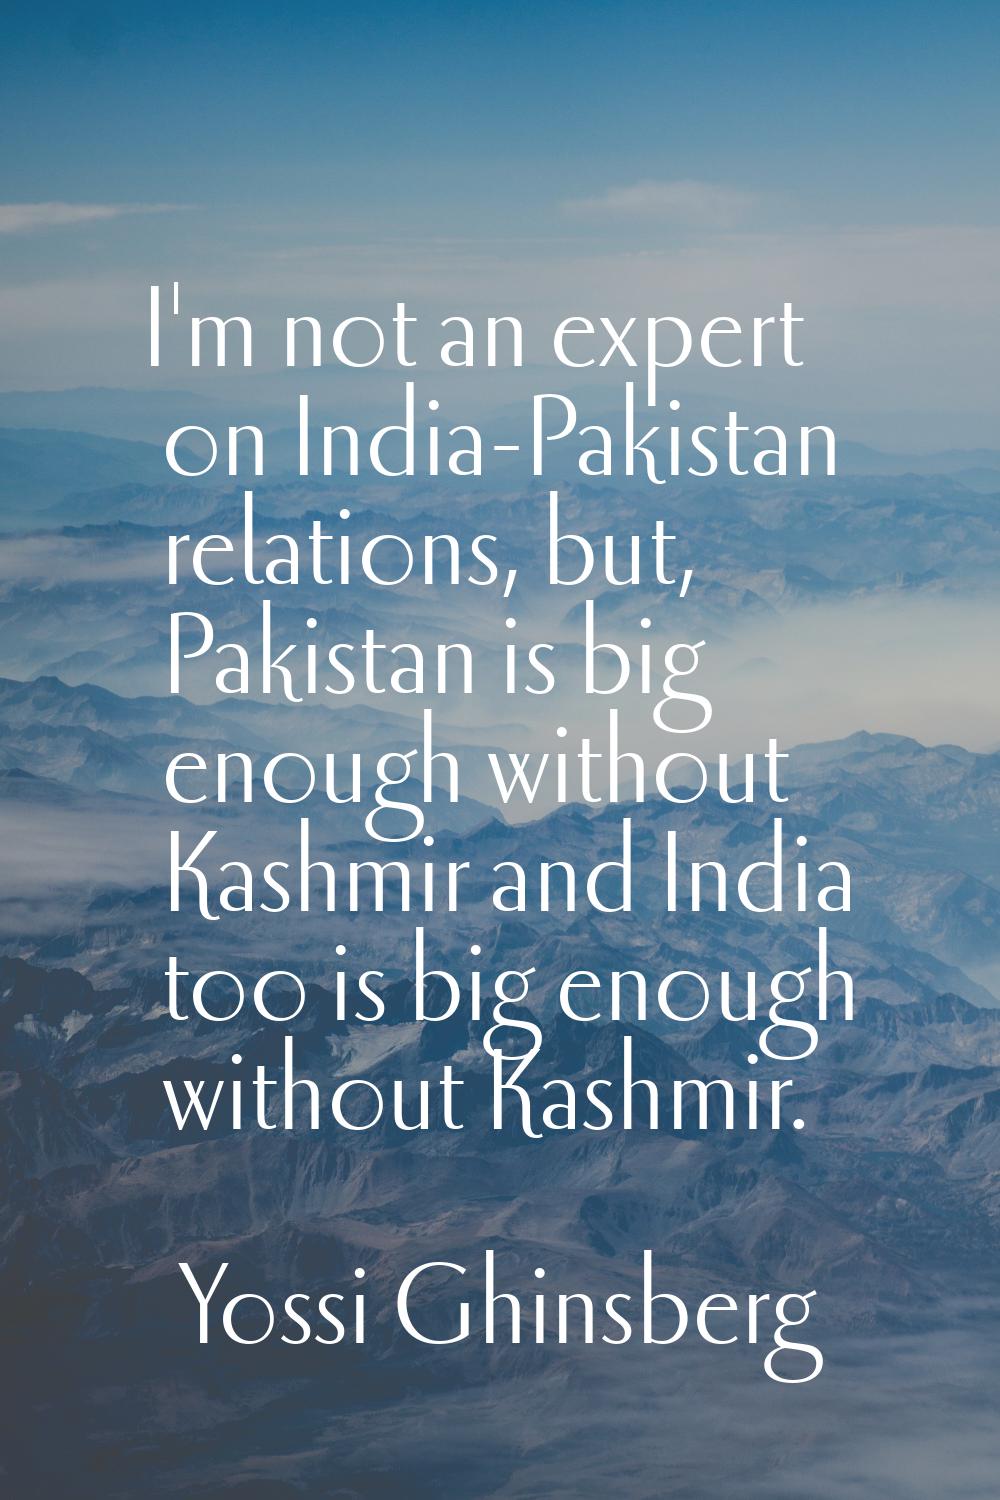 I'm not an expert on India-Pakistan relations, but, Pakistan is big enough without Kashmir and Indi